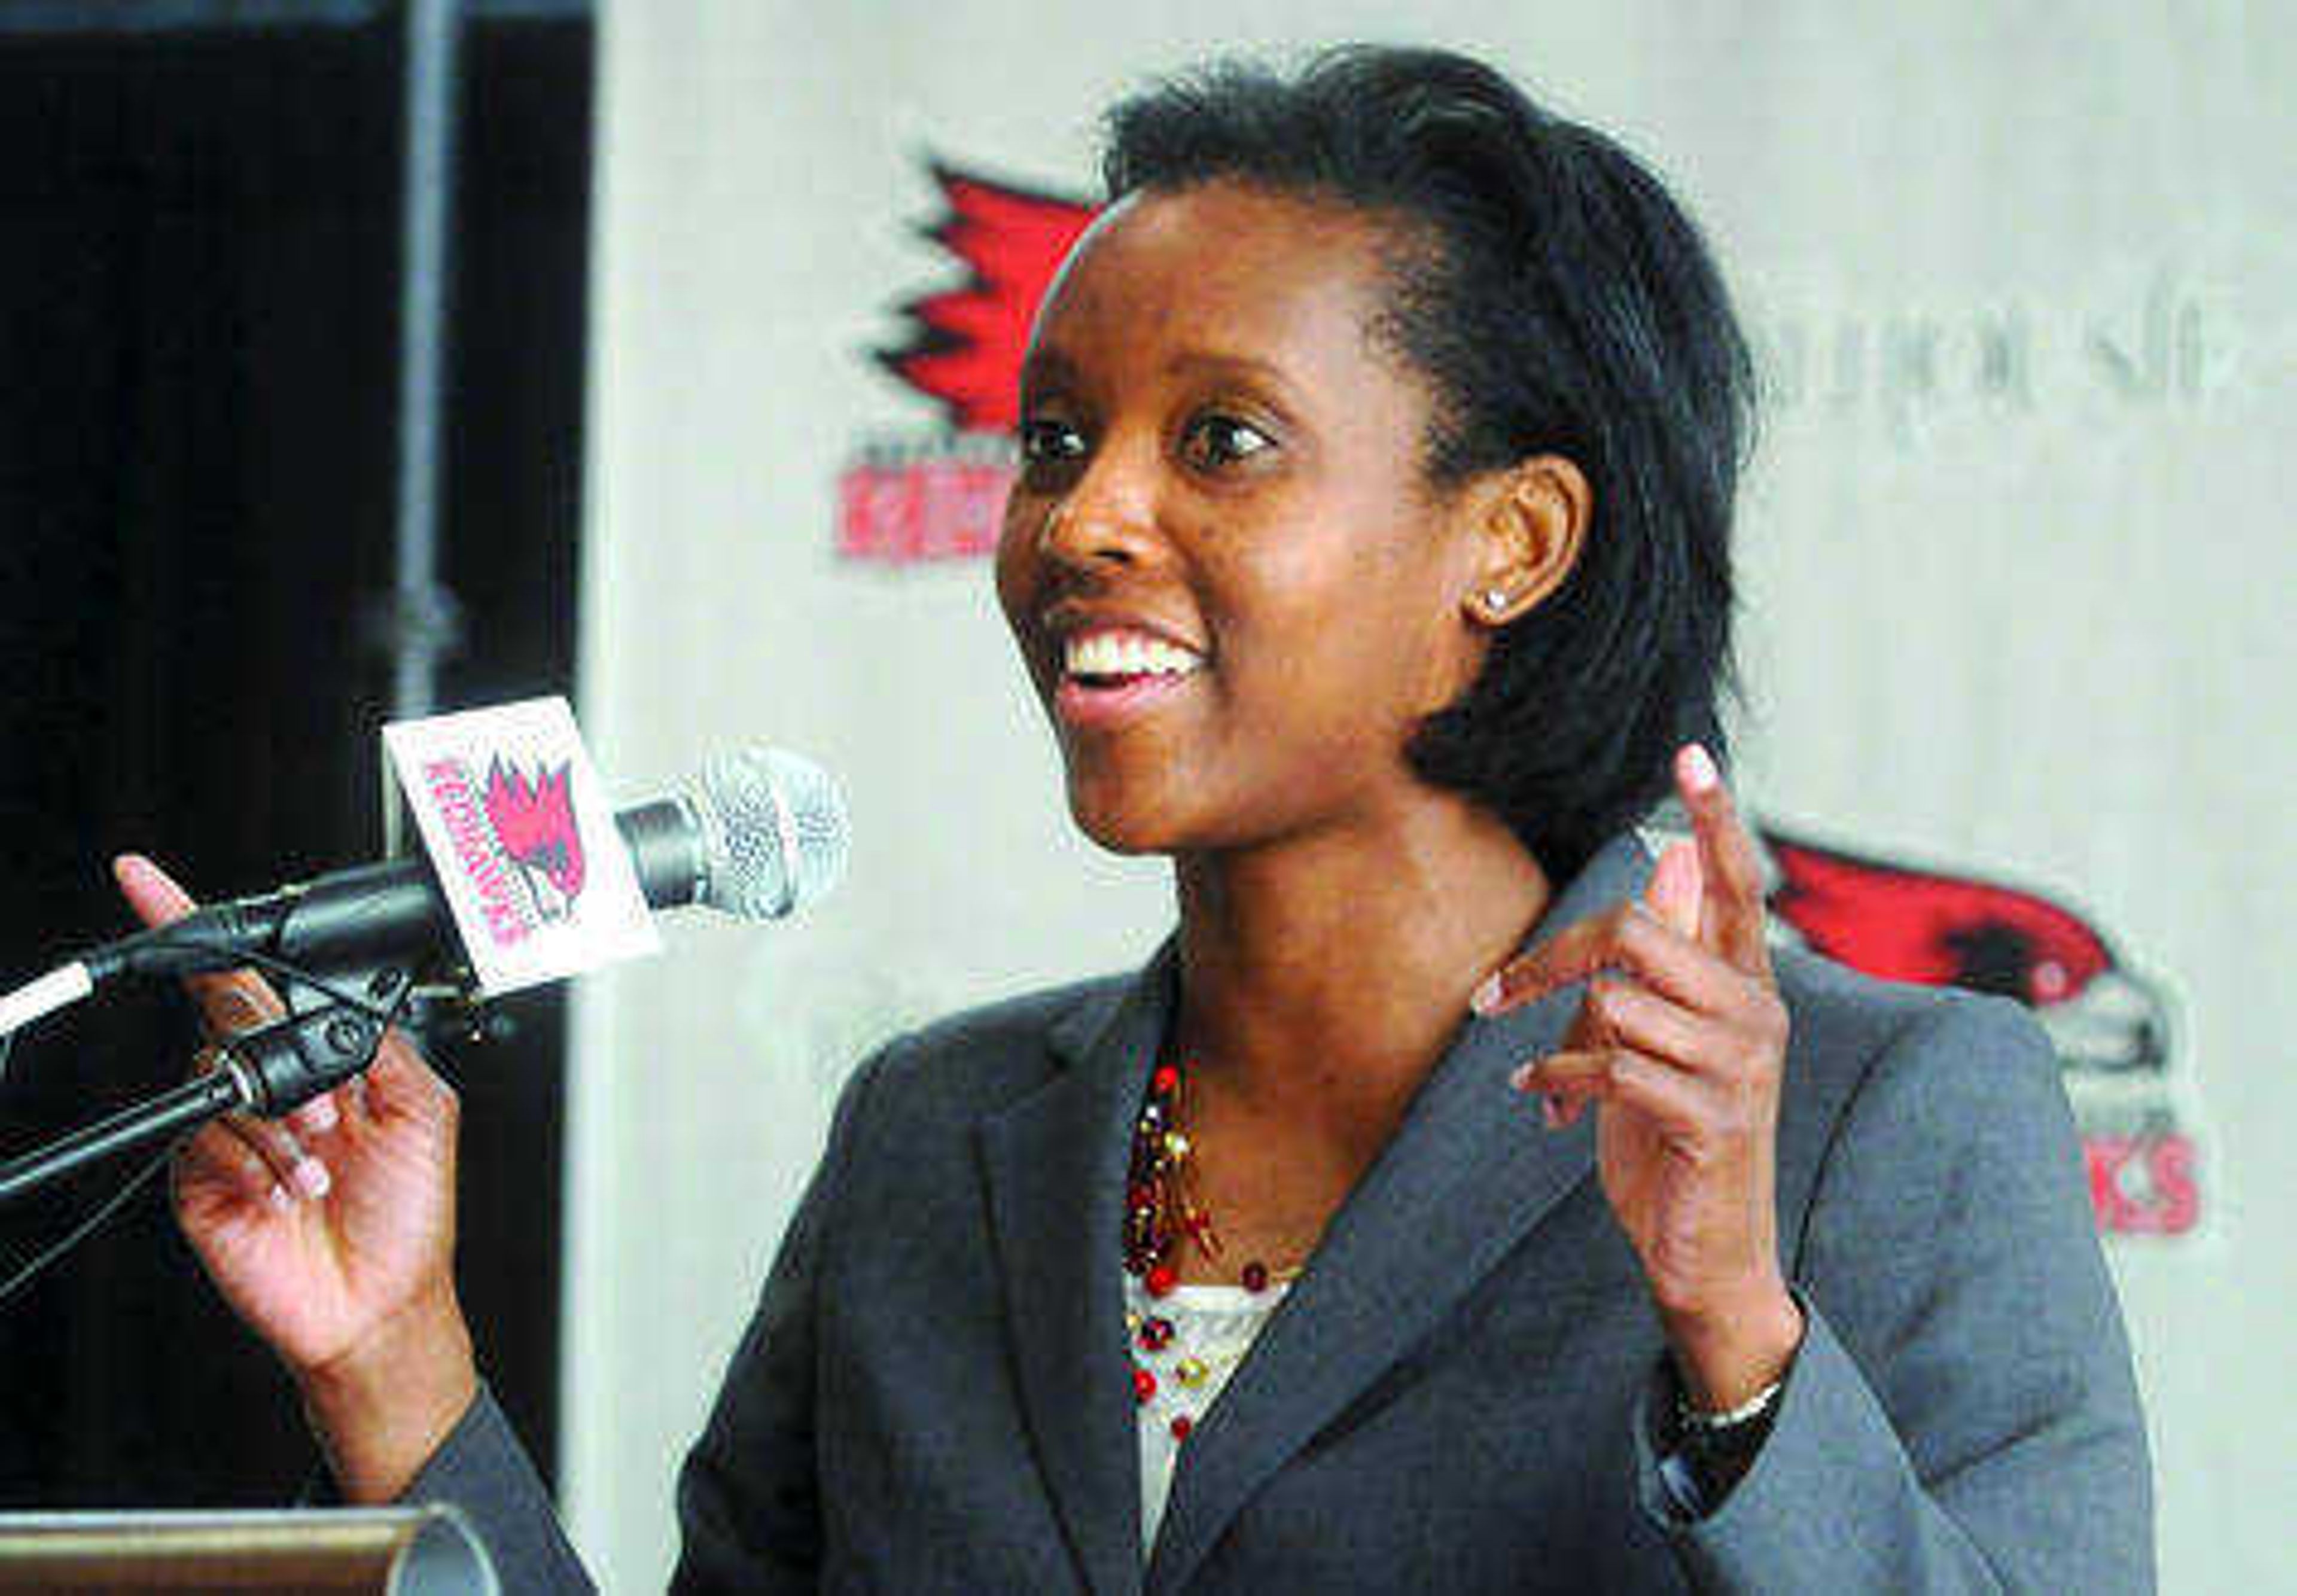 Rekha Patterson speaks during a press conference Wednesday, April 15. Patterson was named the new head women's basketball coach at Southeast Missouri State University. Submitted photo.